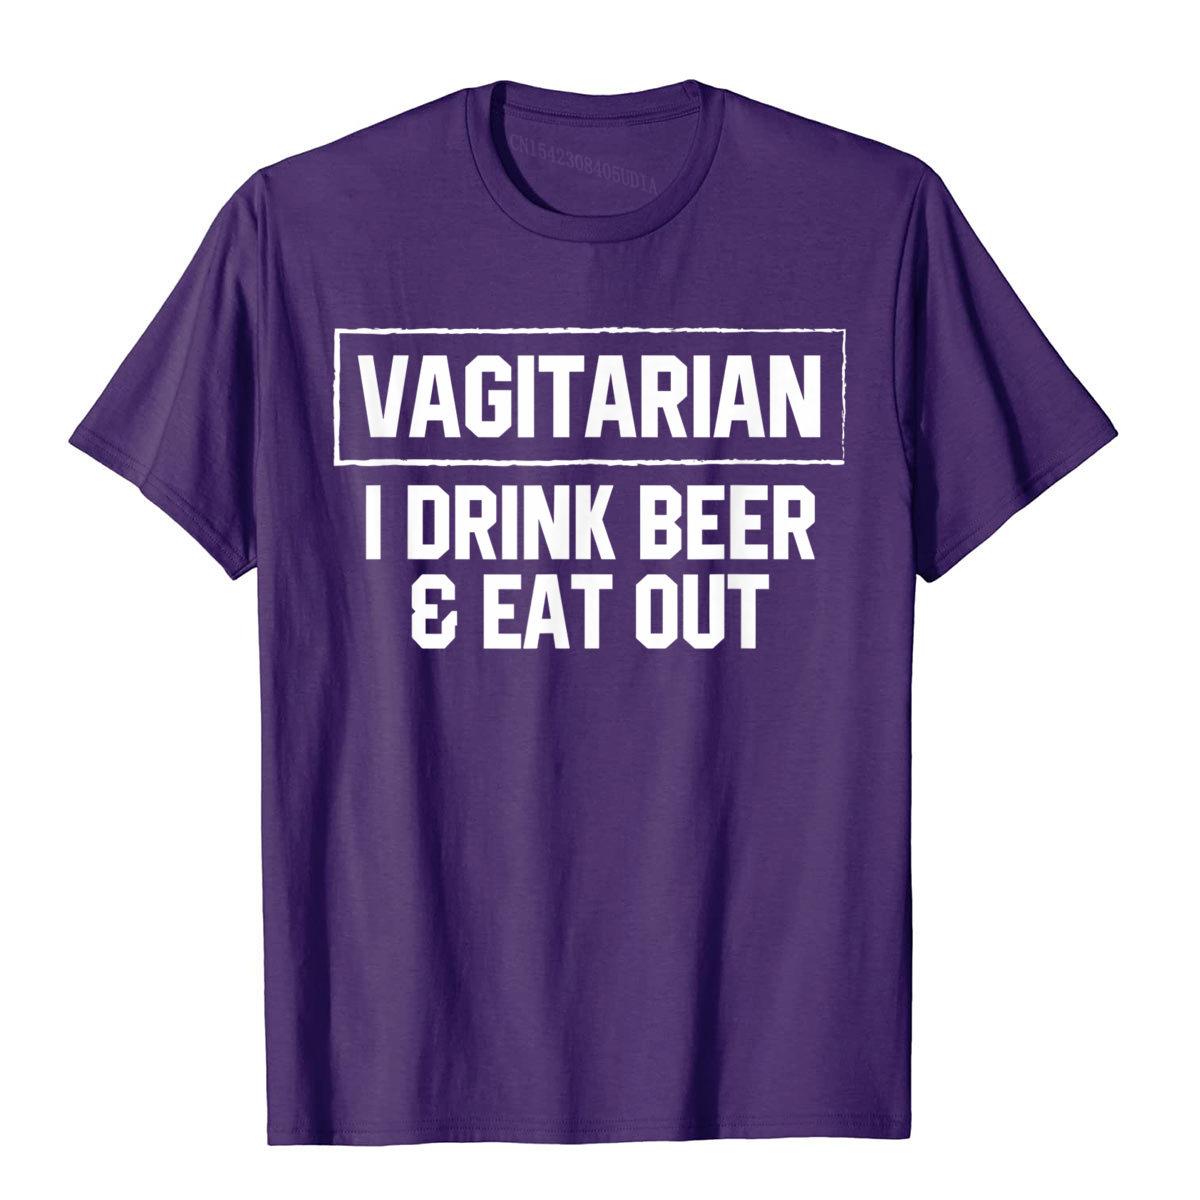 Vegitarian Drink Beer and Eat Out- T-Shirts Gift Male